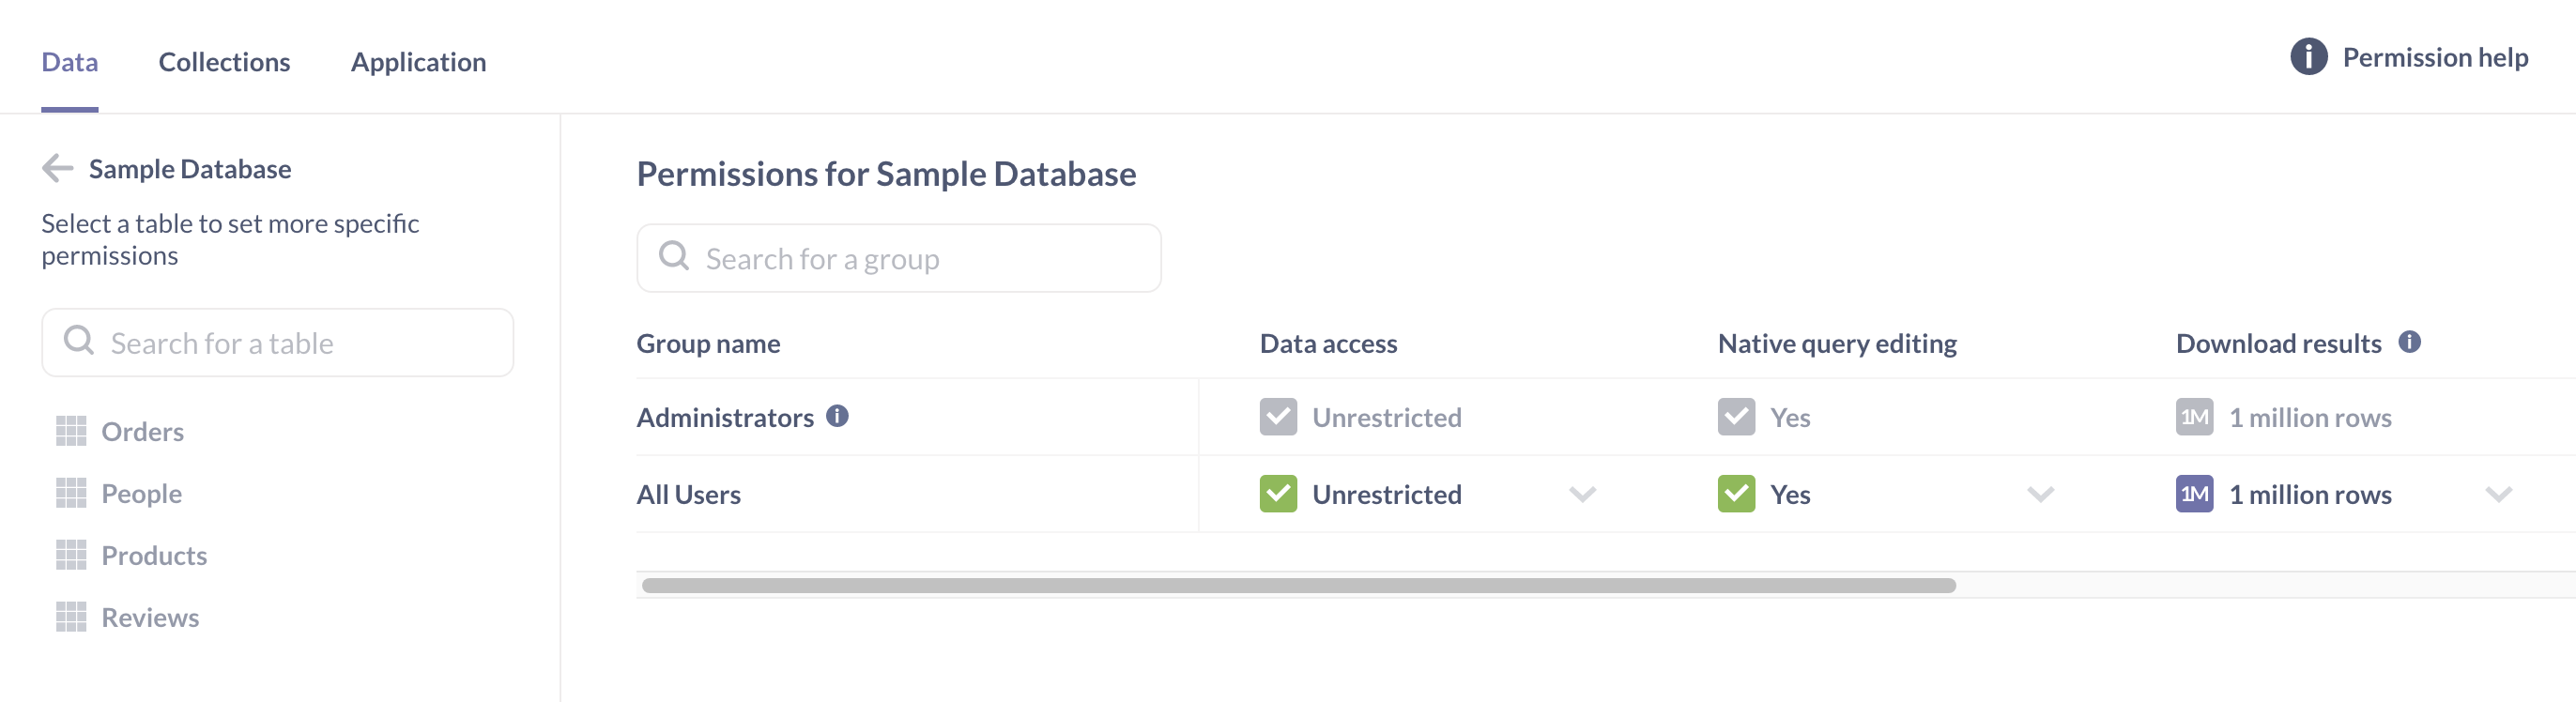 Add permissions to databases and collections using groups.